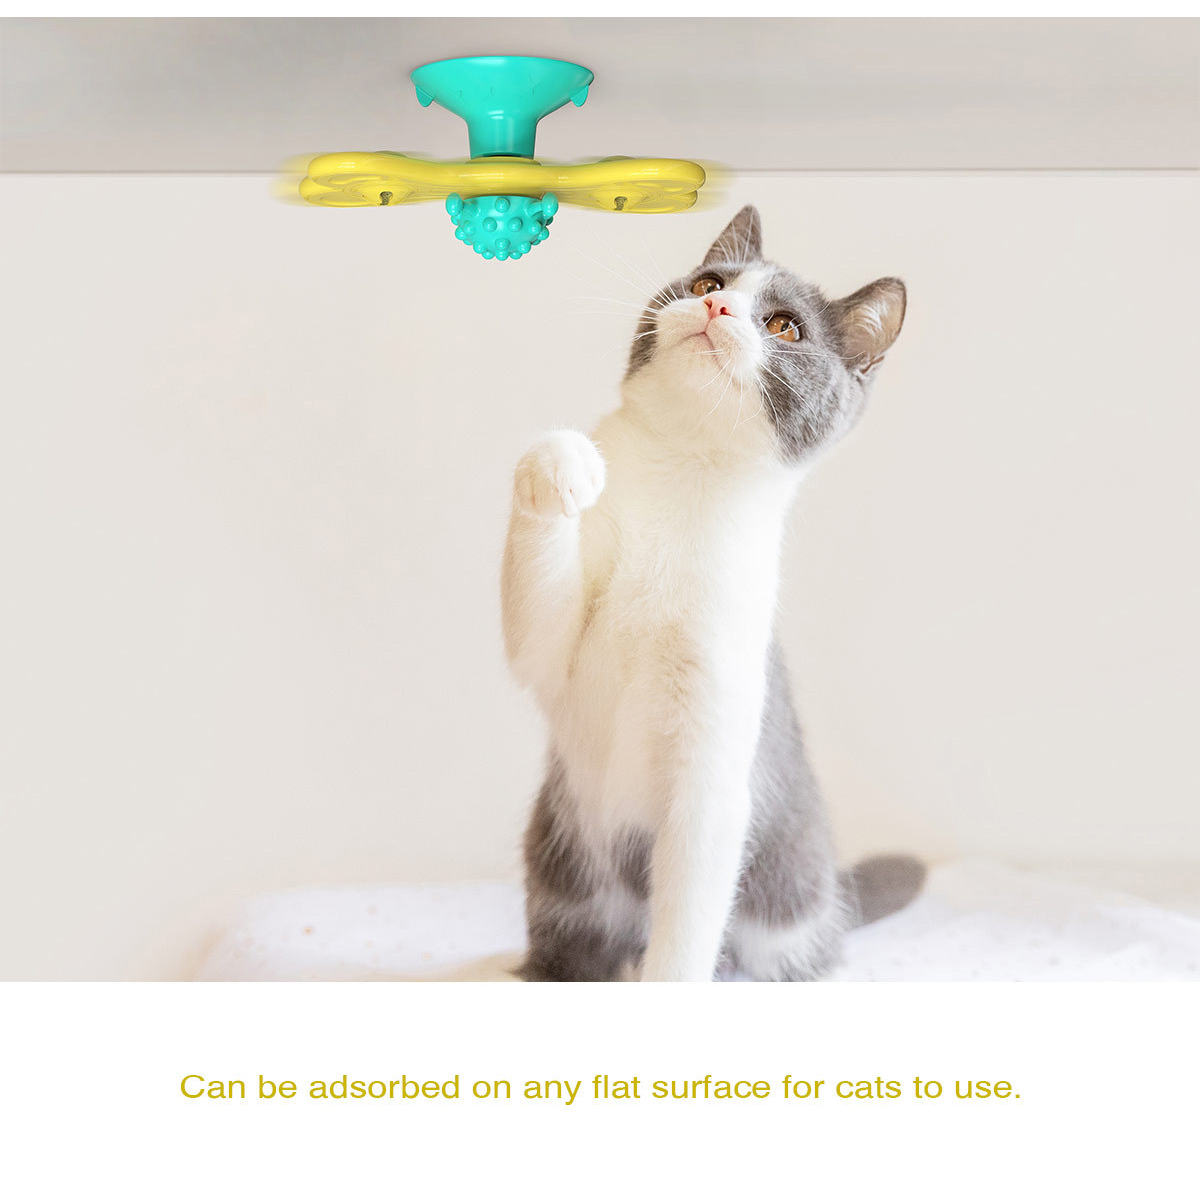 Windmill-Cat-Toy-Funny-Turntable-Teasing-Pet-Toy-Scratching-Tickle-Cats-Hair-Brush-Cat-Toys-Interact-1791497-4